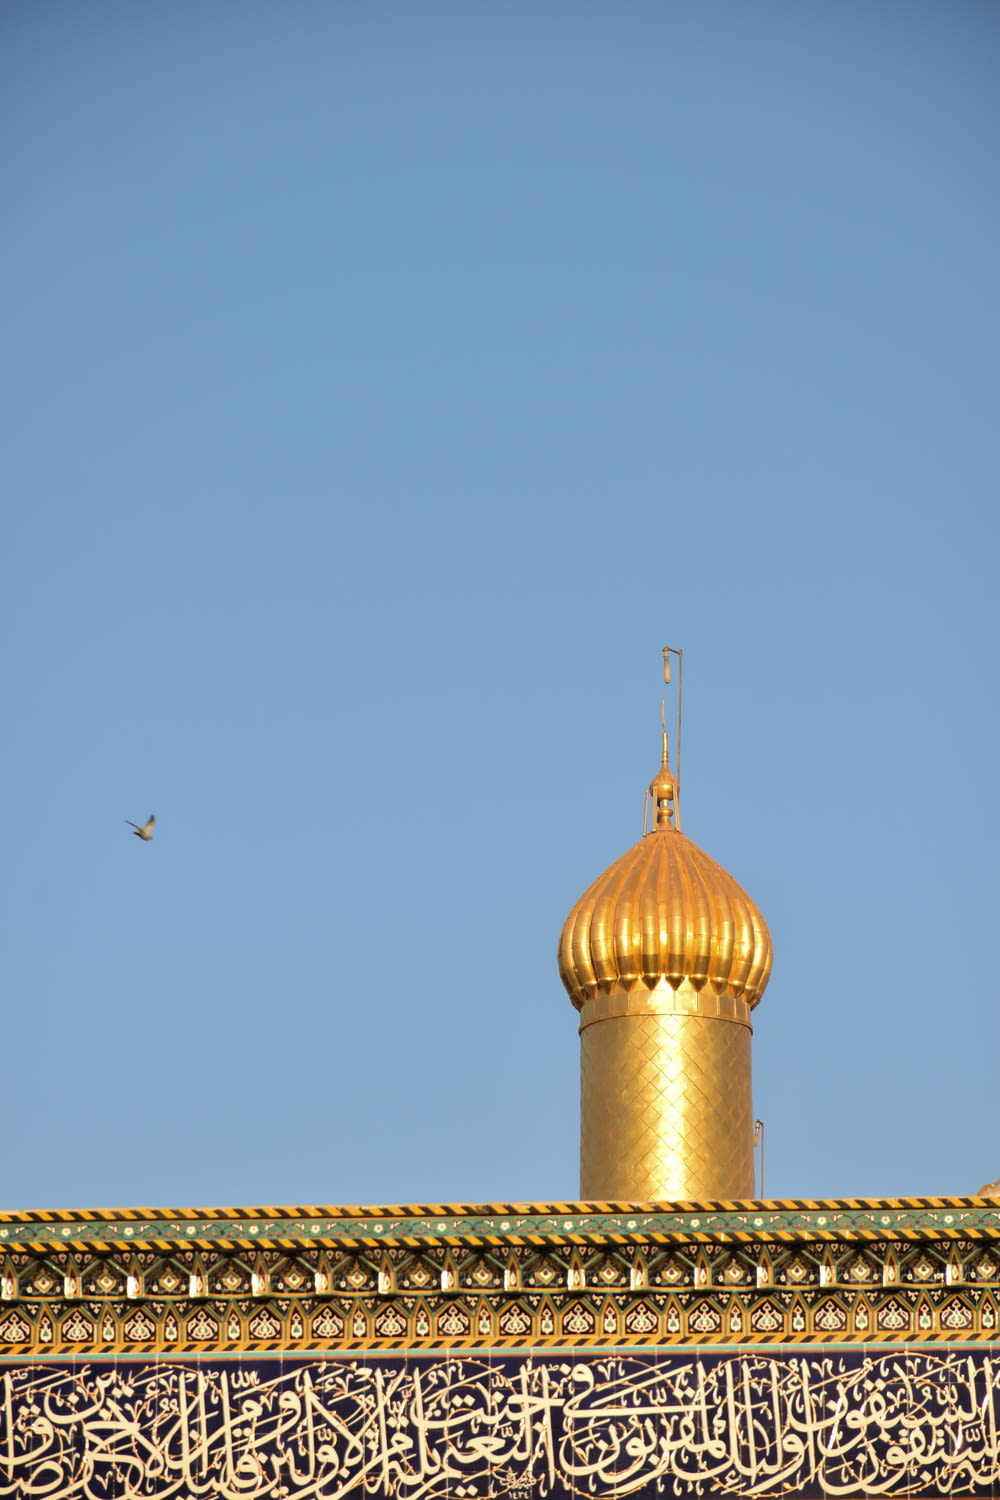 a bird flying over a domed building